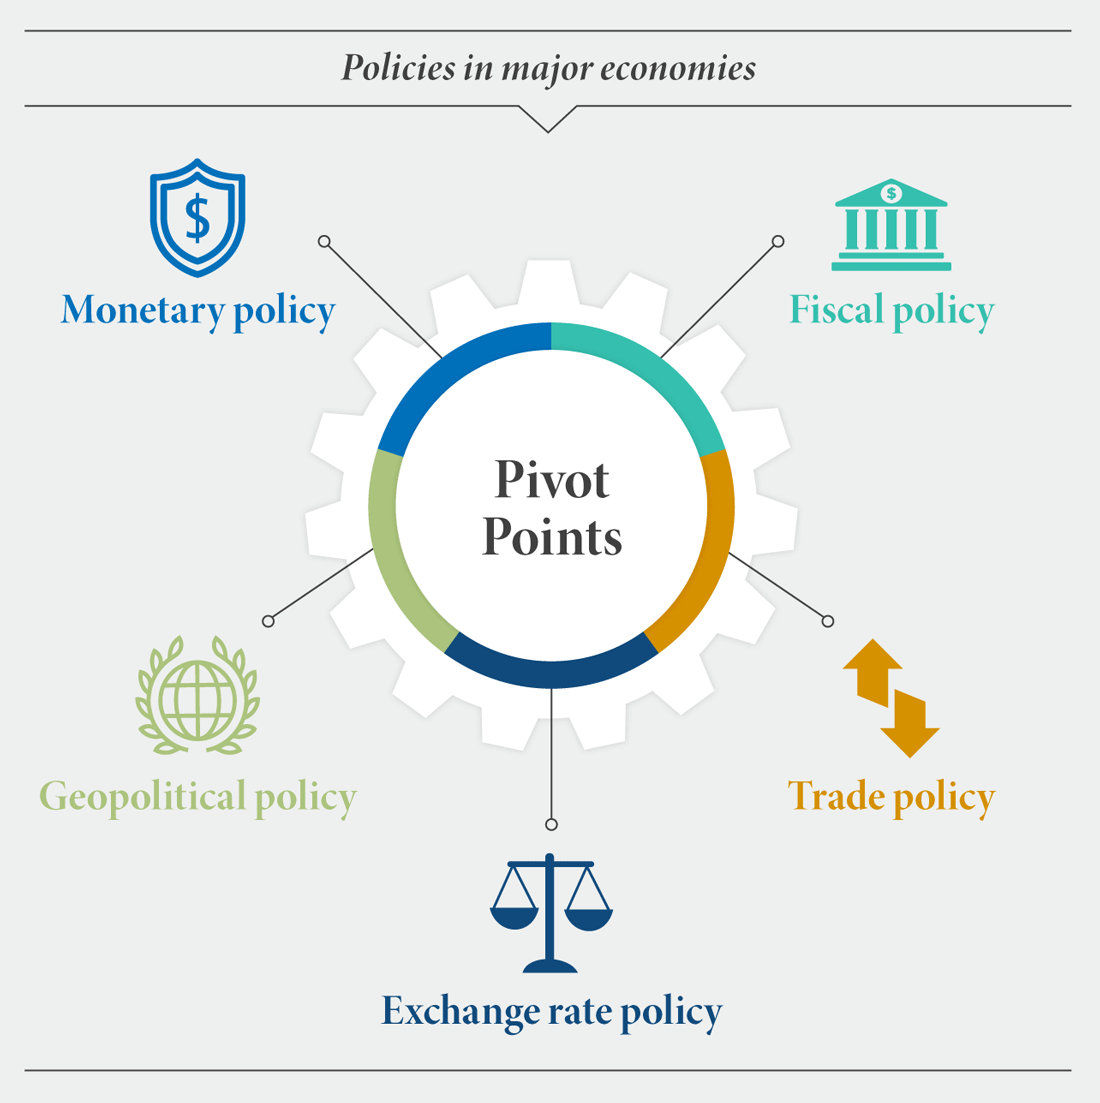 The figure shows a diagram featuring a circle in the middle, labeled “Pivot Points,” and divided into five colors, each corresponding to the following policies:  monetary, fiscal, trade, exchange, and geopolitical—all of which are on the outside of the circle.